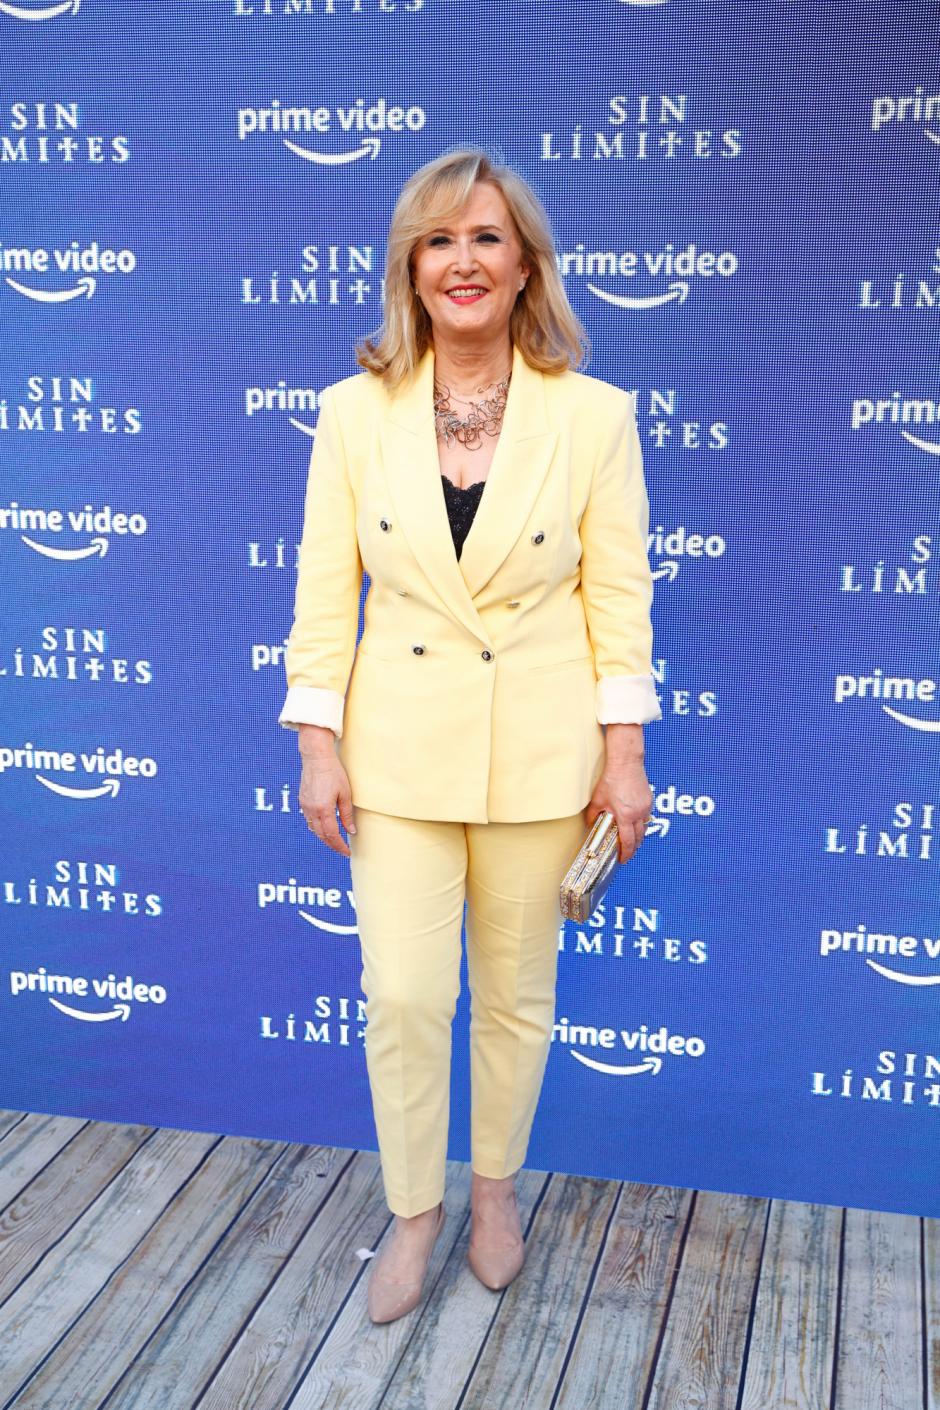 at photocall for premiere film Sin Limites in Madrid on Tuesday, 7 June 2022.